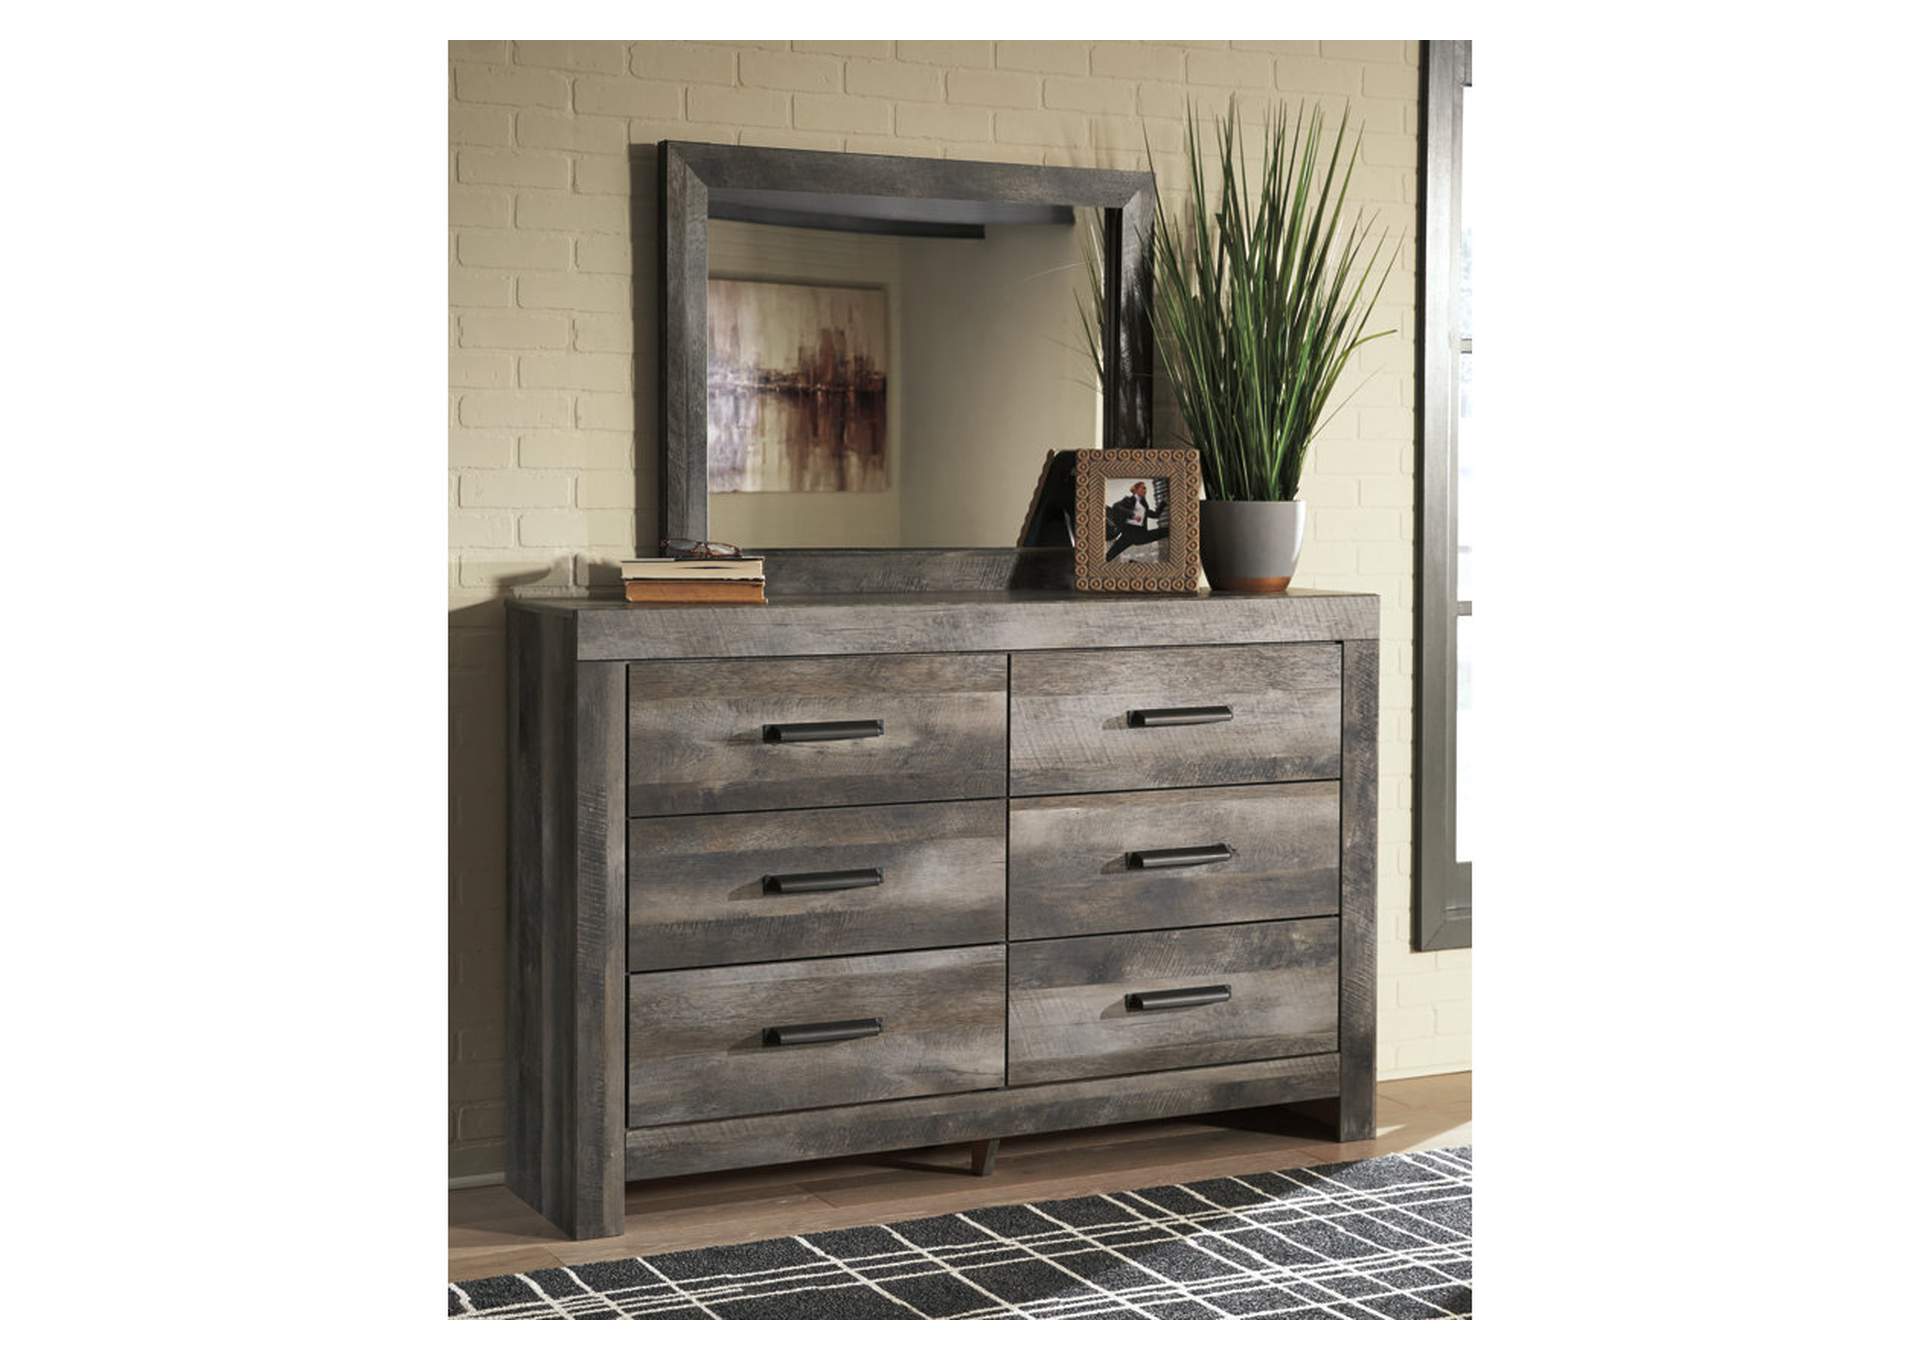 Wynnlow King Crossbuck Panel Bed with Mirrored Dresser, Chest and Nightstand,Signature Design By Ashley